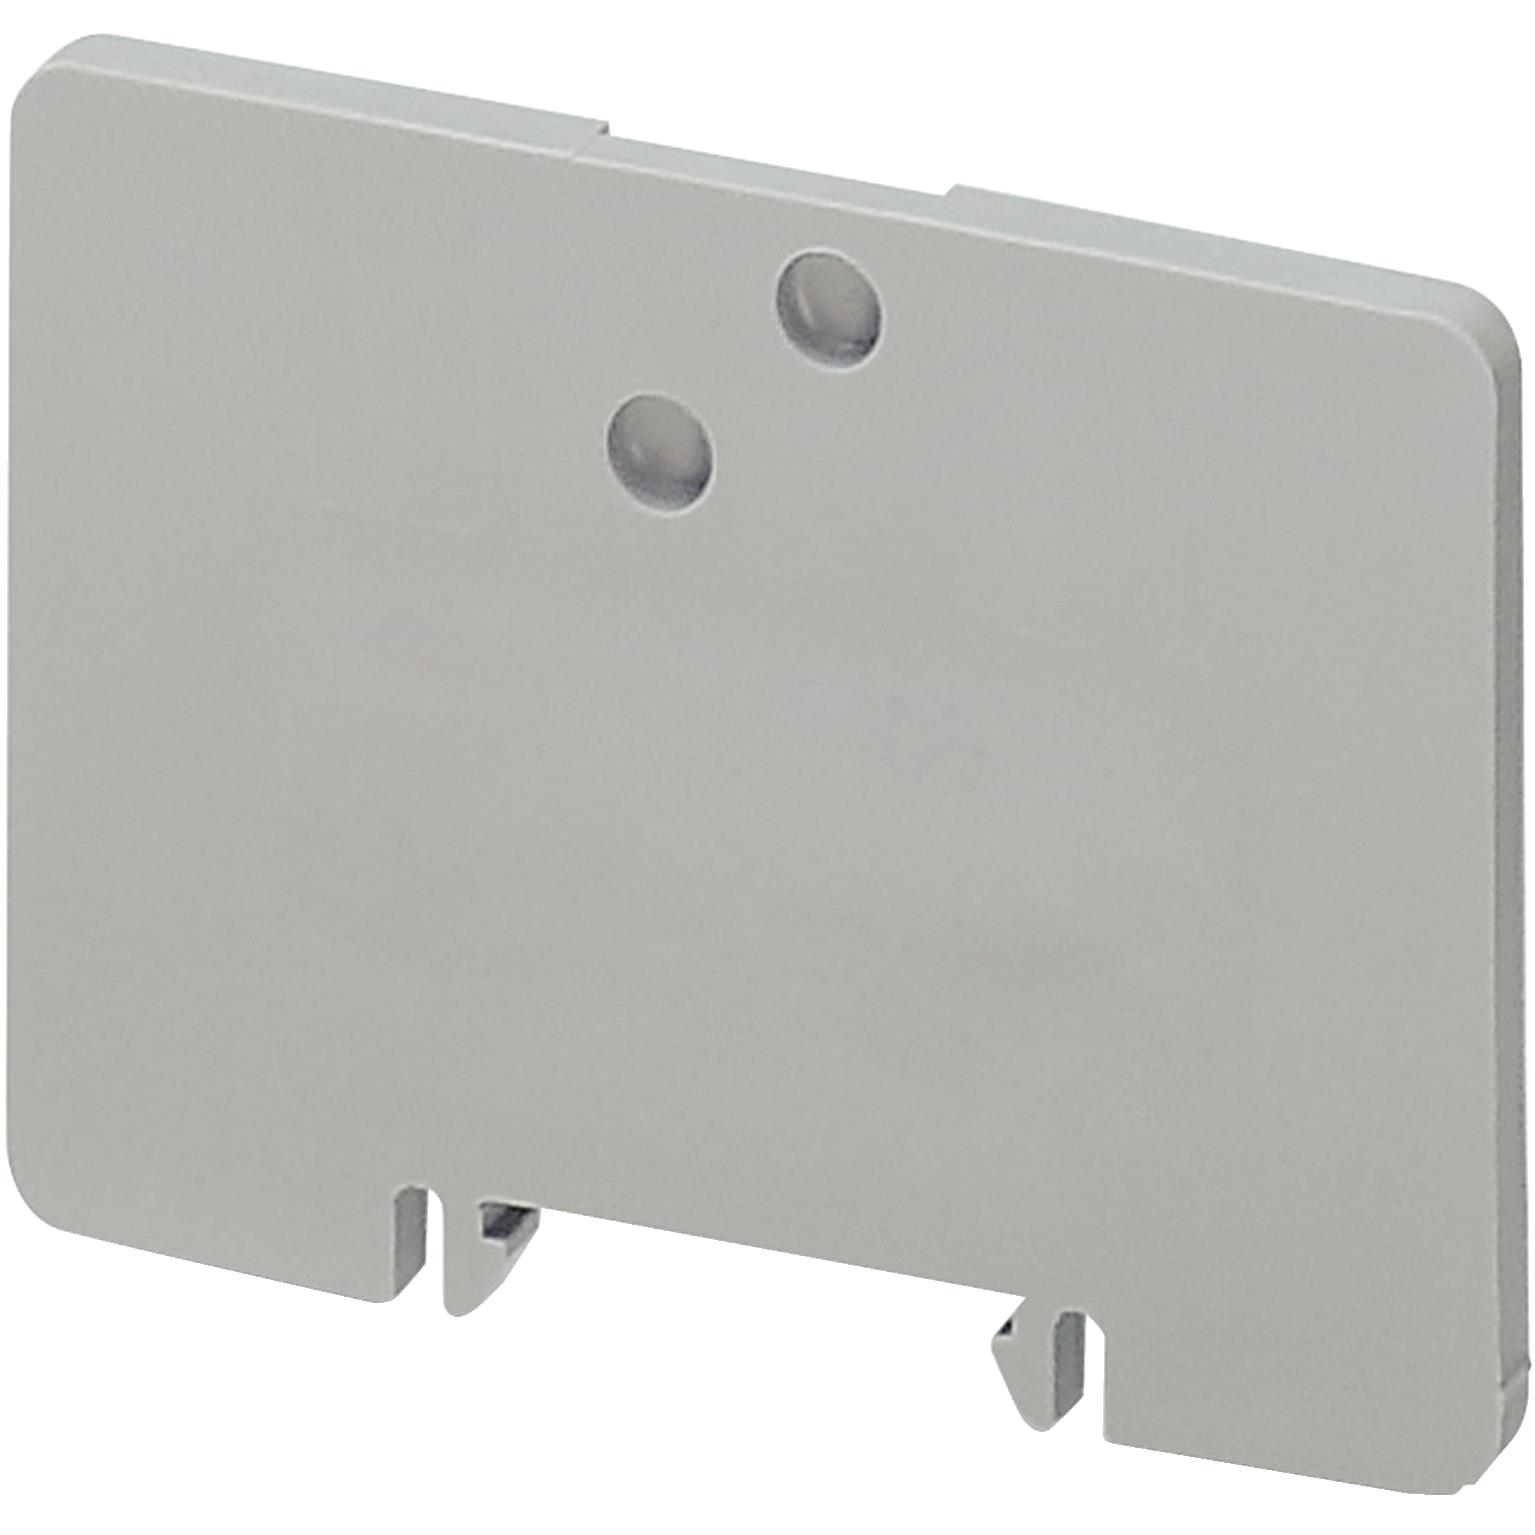 【NSYTRAPM22】PARTITION PLATE FOR MINI SCREW T